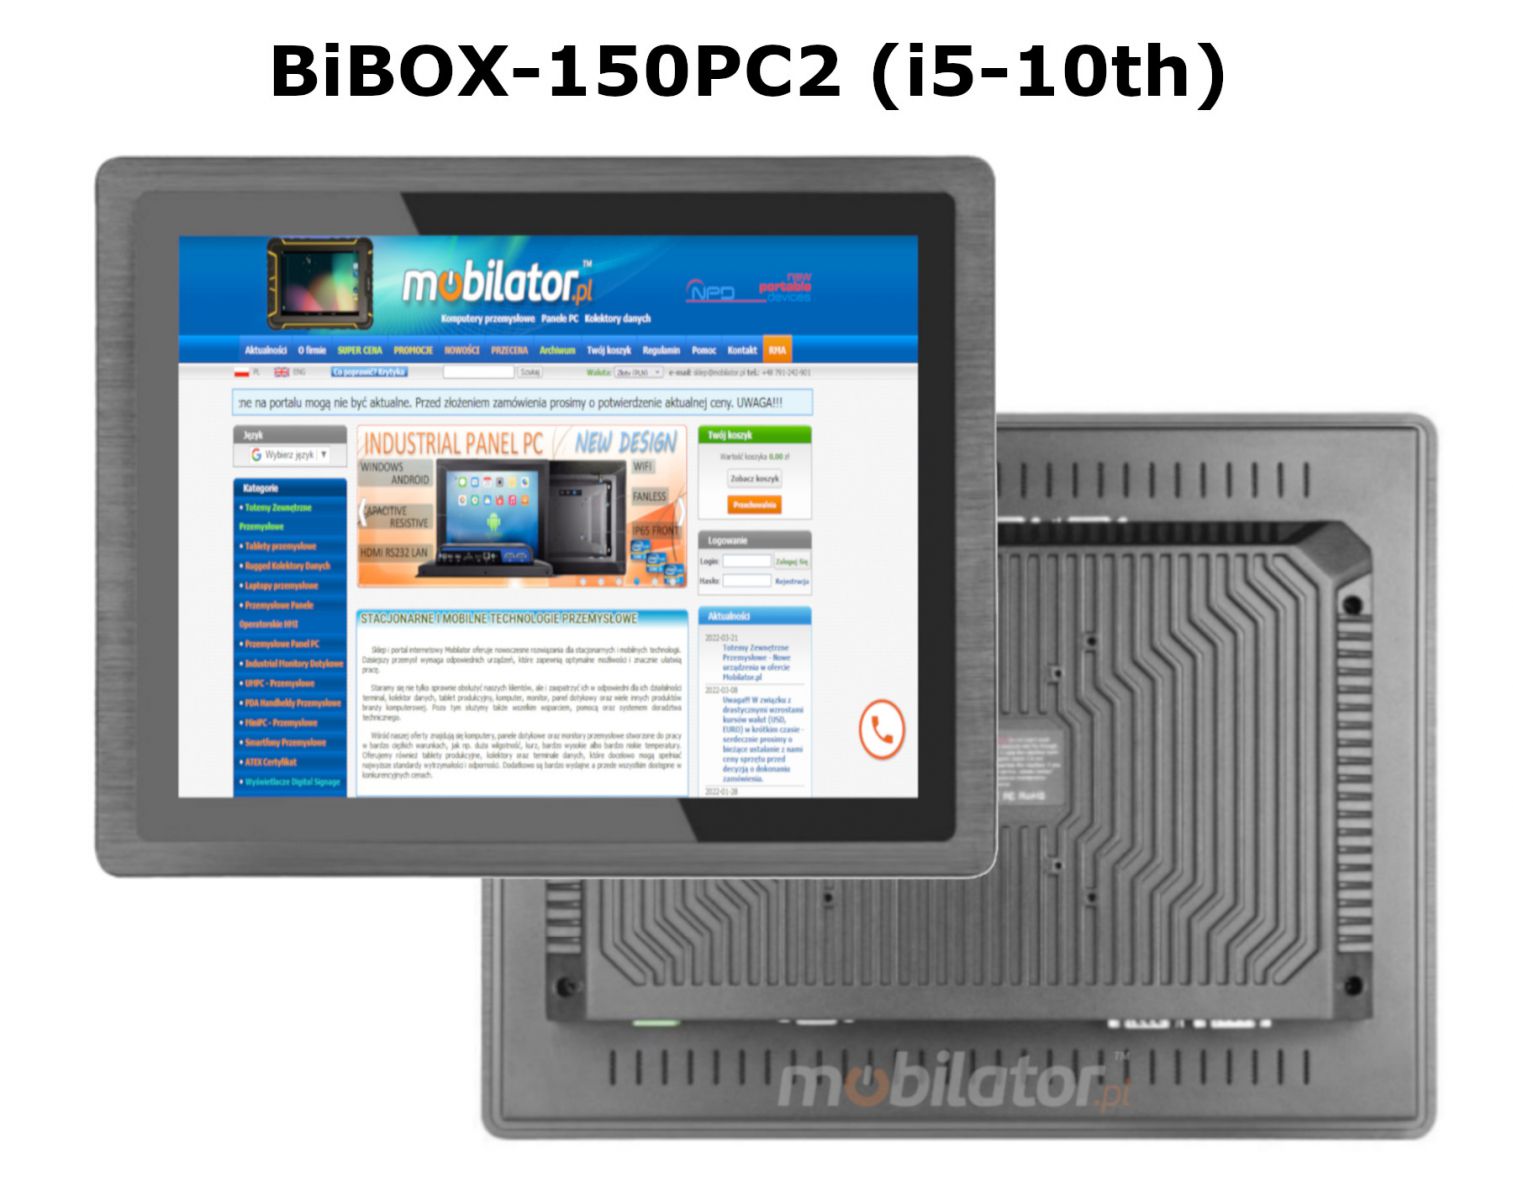 BIBOX-150PC2 spacious and industrial PC panel with 4G LTE connectivity and 512GB SSD and 16GB RAM